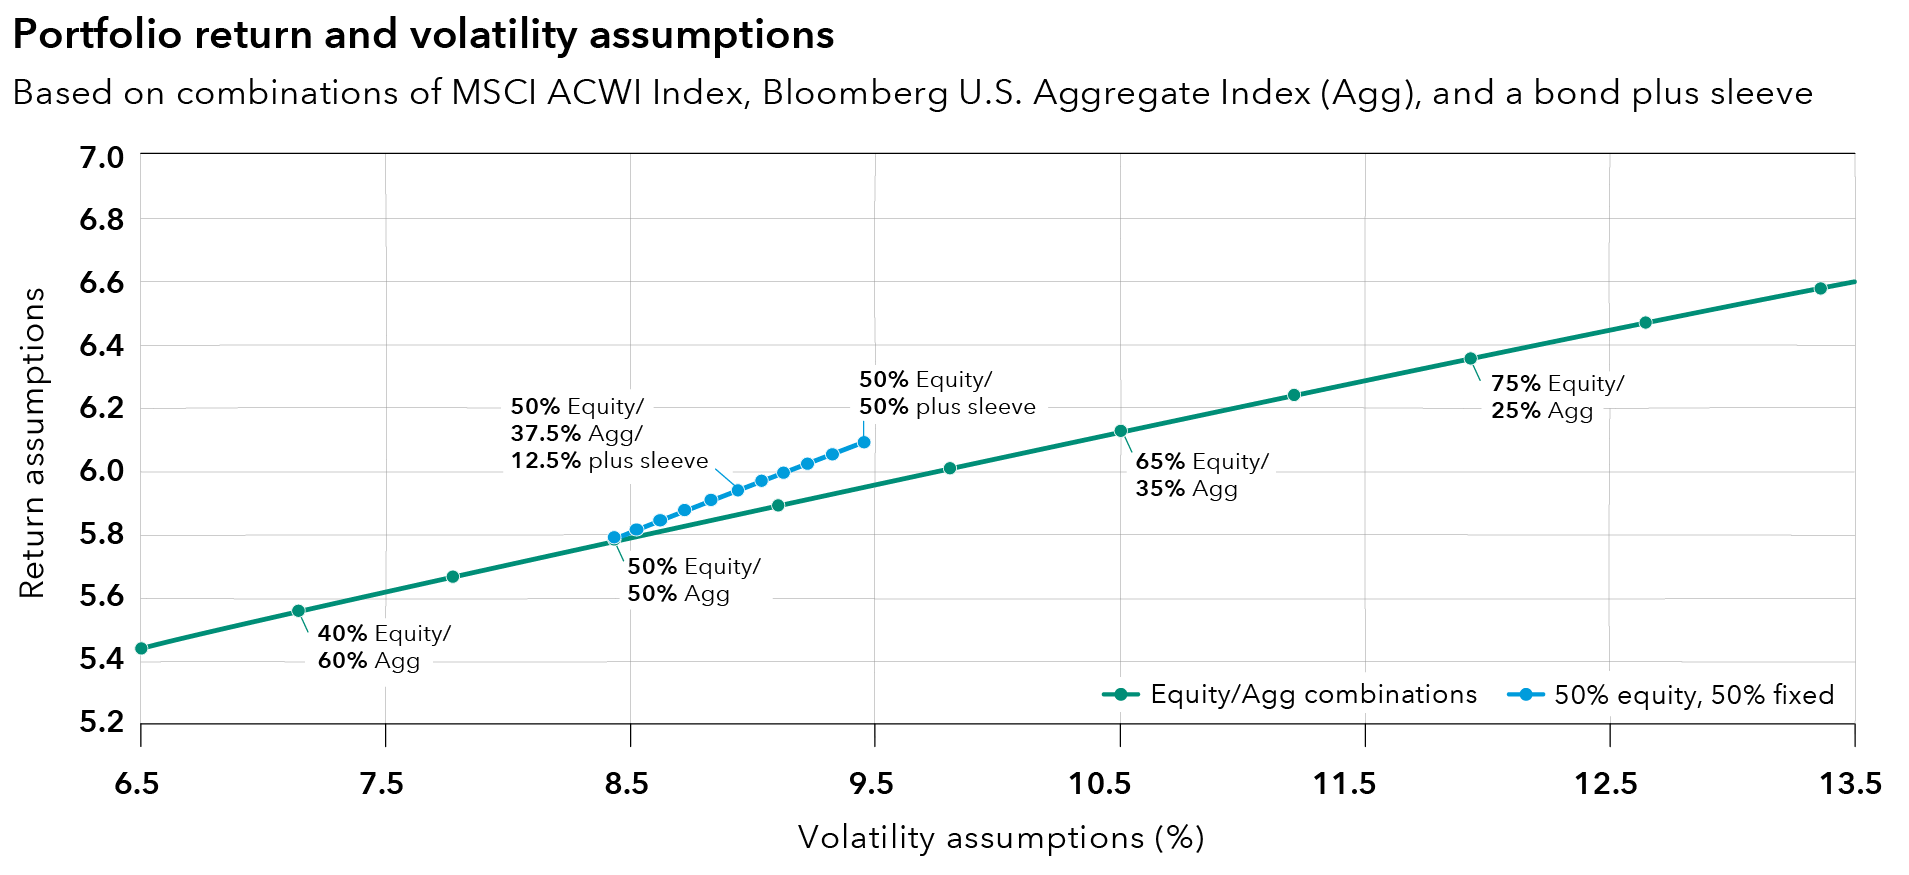 This is a scatterplot chart with return assumptions (as a percentage) shown on the Y axis and volatility assumptions, or standard deviation shown on the X axis (as a percentage). The chart shows two types of dots. There are green dots representing portfolios that are differently sized combinations of two components: The MSCI All Country World (ACWI) Index, representing global equity, and the Agg. The green-dotted portfolios do not include any plus sleeve allocation. The labeled green-dot portfolios range from 40% equity/60% Agg at the far left to 75% equity/25% Agg at the far right. The green dots are connected to form a green line. There are also blue dots that represent a portfolio of 50% equity with a fixed income allocation consisting of two varying components: a) Bloomberg U.S. Aggregate Index (Agg) and b) a plus sleeve with three equally weighted components: 1) 50% J.P. Morgan Emerging Markets Bond Index Global Diversified Index/50% J.P. Morgan GBI-EM Global Diversified, 2) Bloomberg U.S. High Yield Index and 3) Bloomberg U.S. TIPS Index. The blue dots are connected to form a blue line. The blue line starts at an intersection point of the green line, with a green-line portfolio of 50% equity/50% Agg. The blue line then extends diagonally to the right, above the green line, ending at the blue dot 50% Equity/50% plus sleeve. The blue line terminates above a green-line portfolio consisting of roughly 57.5% equity/42.5% Agg (there is no green dot shown there). Data for the green dots noted on the chart are as follows: 40% equity/60% Agg: 7.1% volatility, 5.6% return; 50% equity/50% Agg: 8.5% volatility, 5.8% return; 65 equity/35% Agg: 10.5% volatility, 6.1% return; 75% equity/25% Agg: 11.9% volatility, 6.4% return. Data for the blue dots noted on the chart are as follows: 50% equity/37.5% Agg/12.5% plus sleeve: 8.9% volatility, 5.9% return; 50% equity/50% plus sleeve: 9.5% volatility, 6.1% return. 